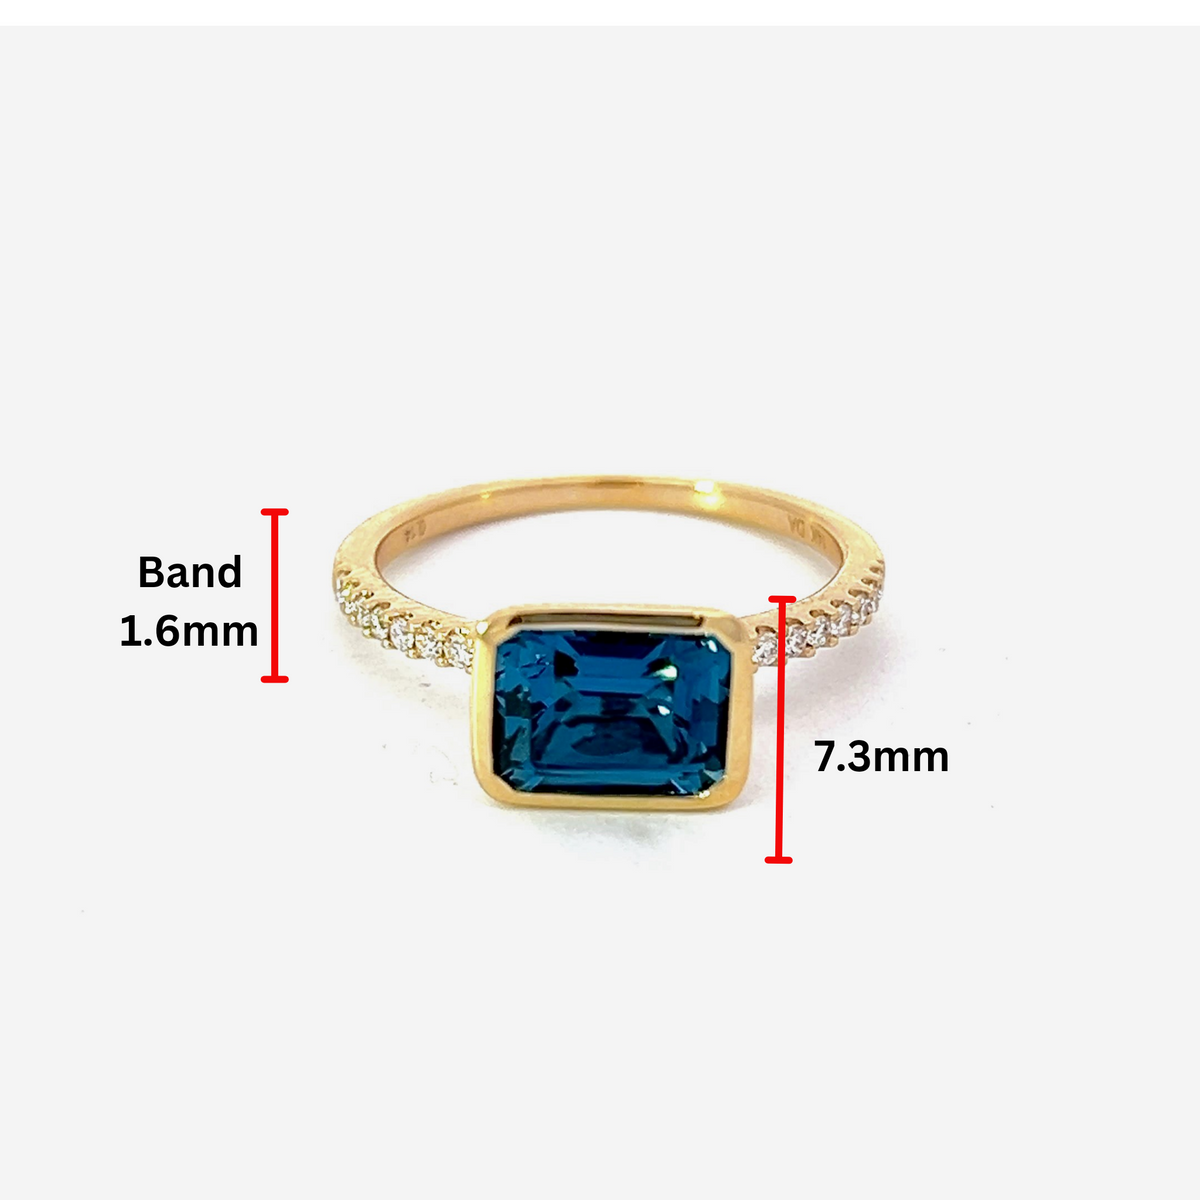 14K Yellow Gold  1.28cttw Blue Topaz and 0.14cttw Diamond Ring - Size 6